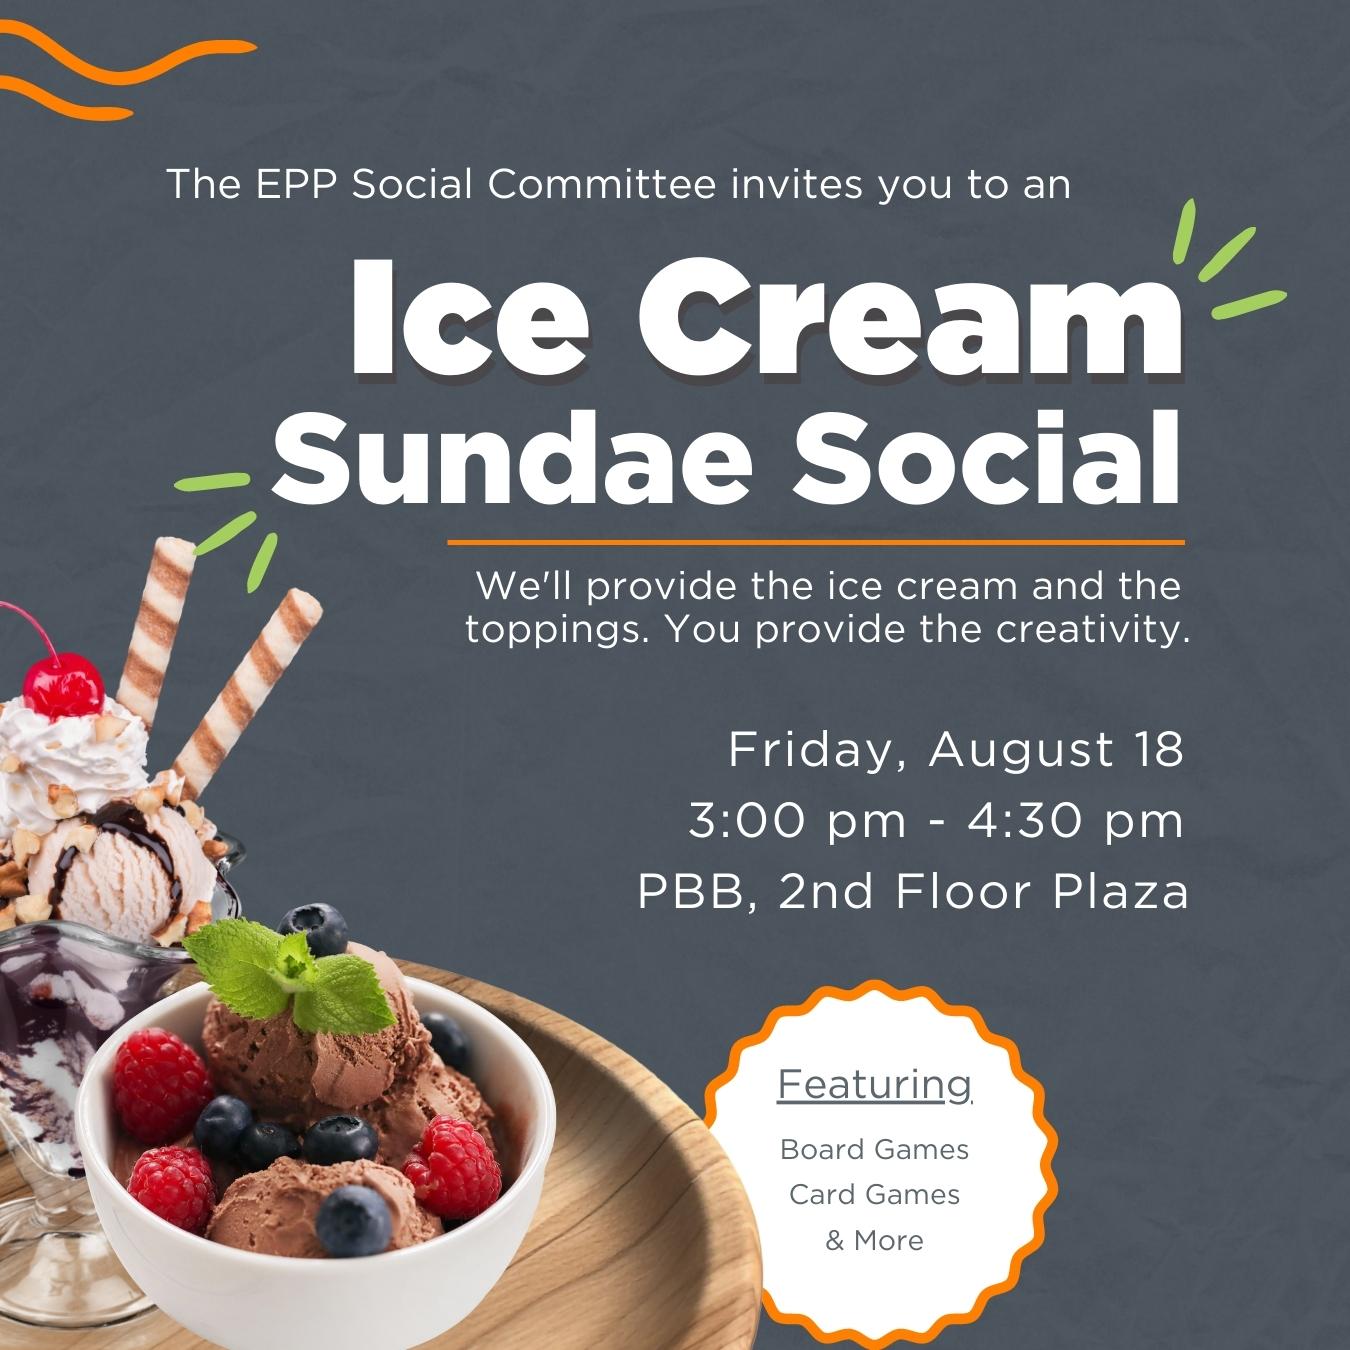 The EPP Social Committee is hosting an Ice Cream Sundae Social on Friday, August 18 from 3:00 - 4:00 pm.